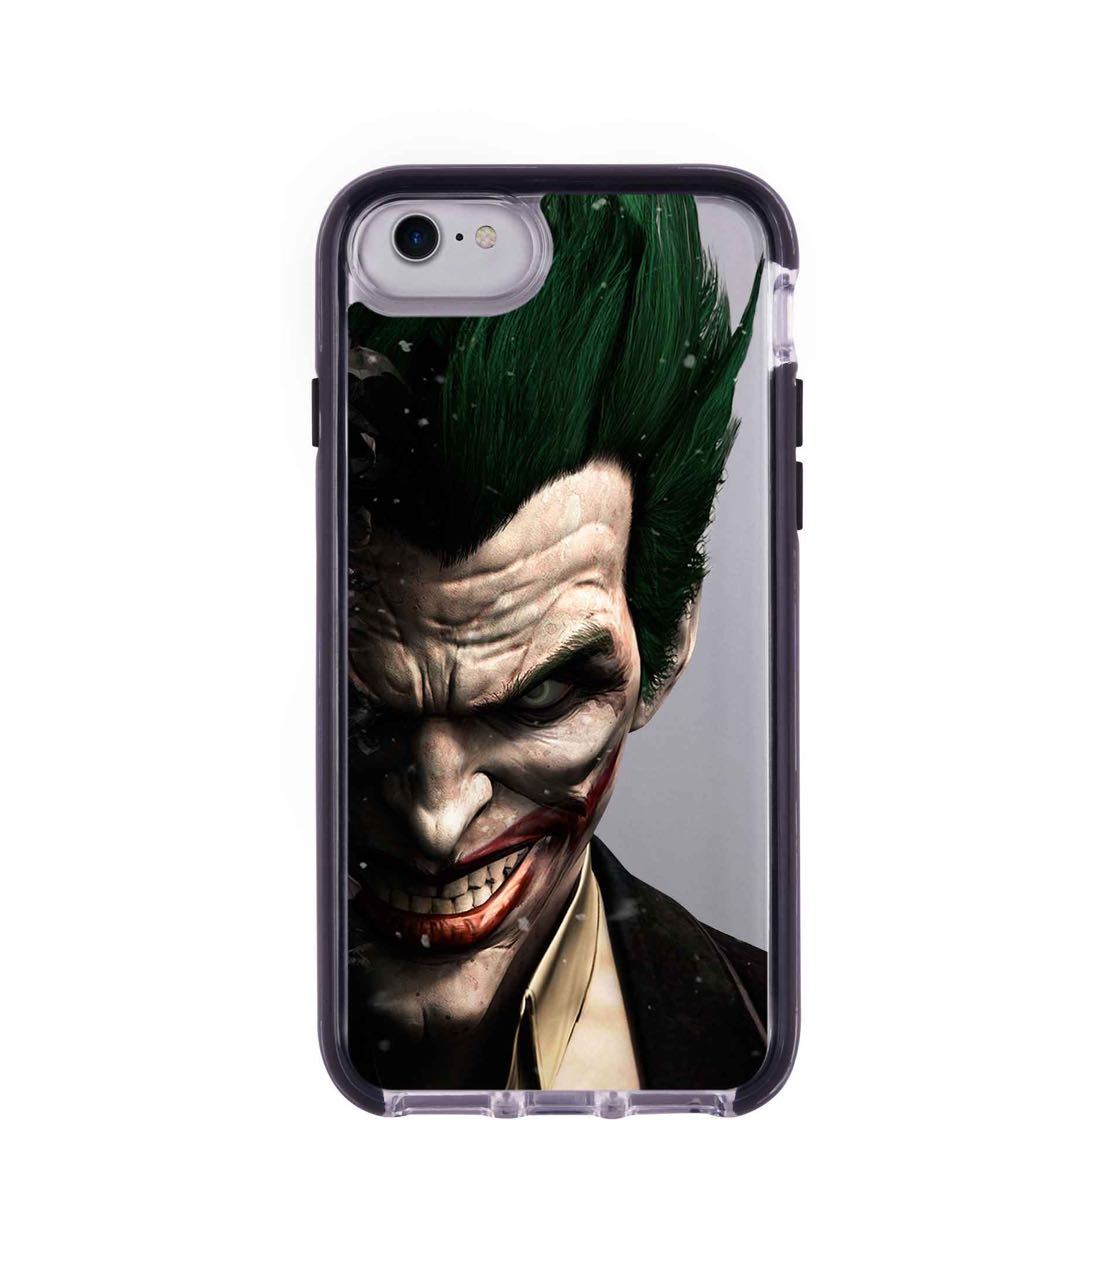 Joker Withers - Extreme Phone Case for iPhone 7